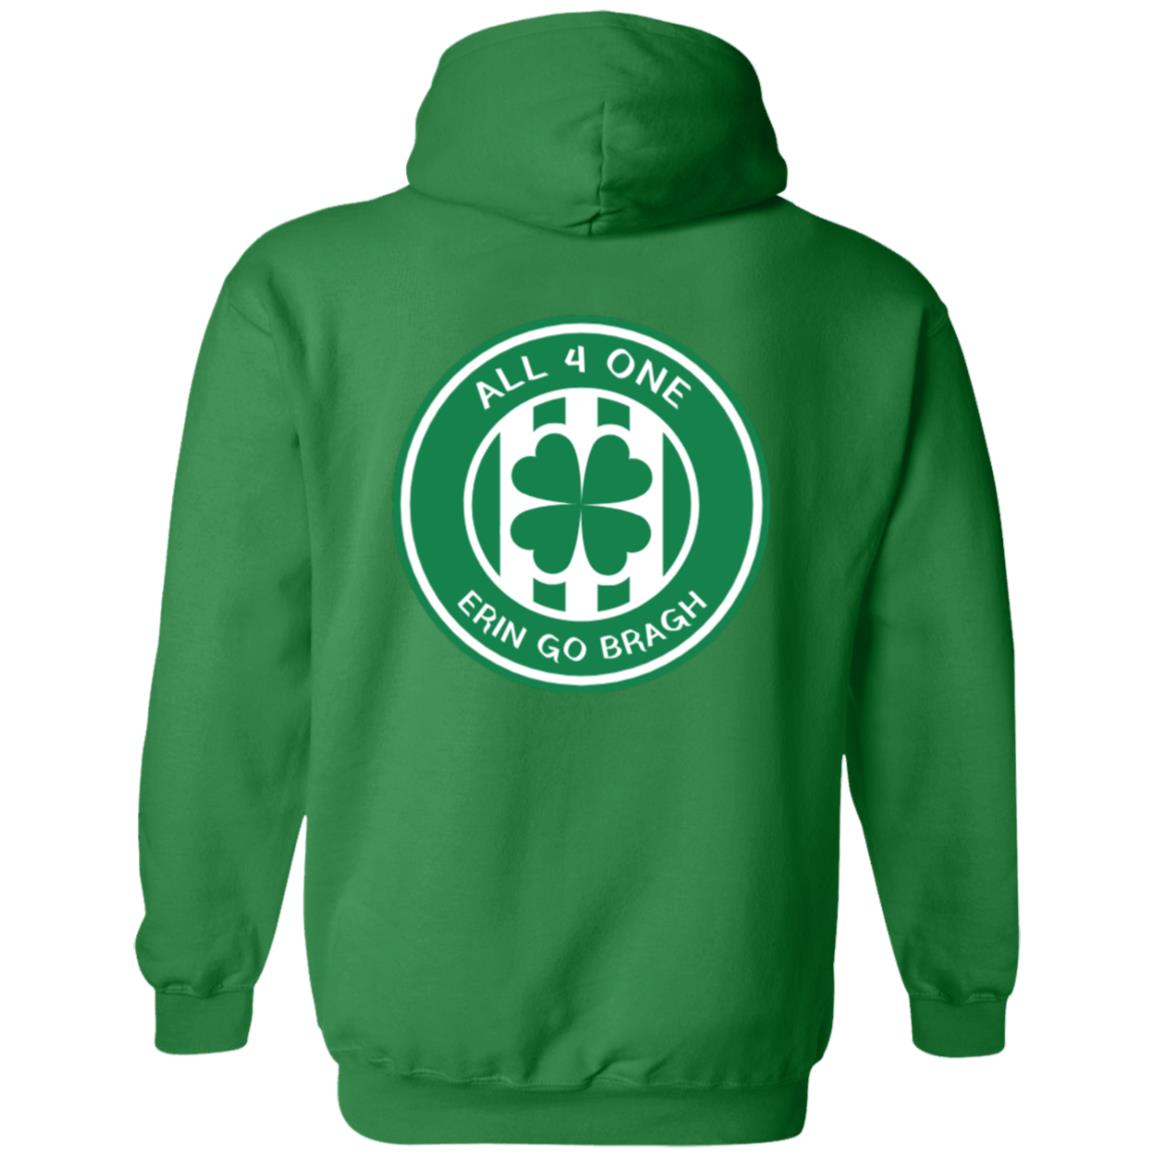 All 4 One St. Patrick's Day Zip Up Hooded Sweatshirt